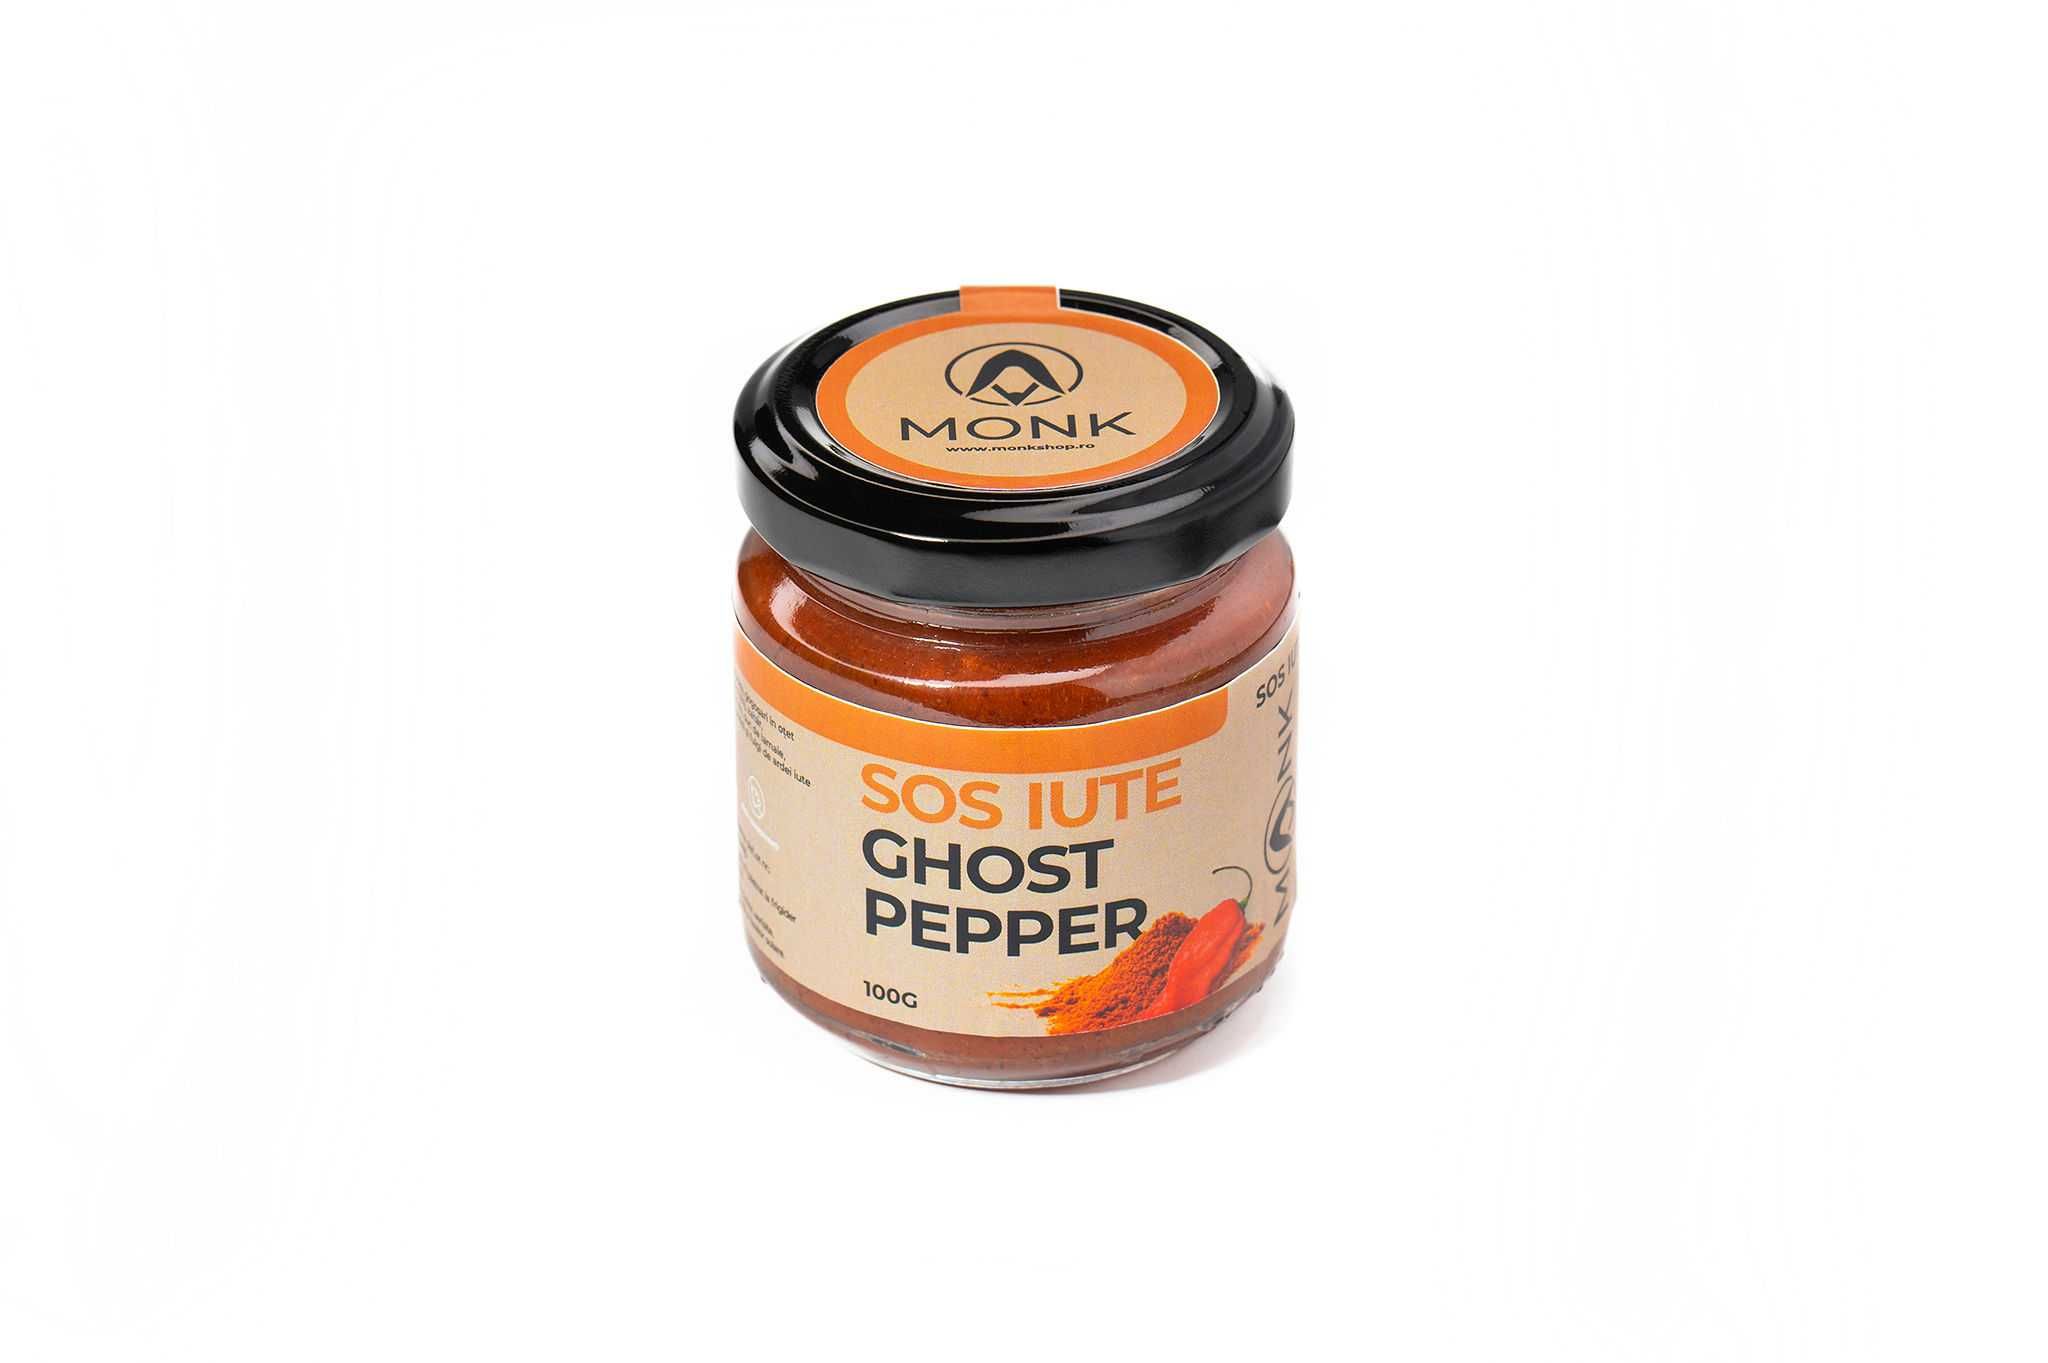 Sos picant Ghost Pepper